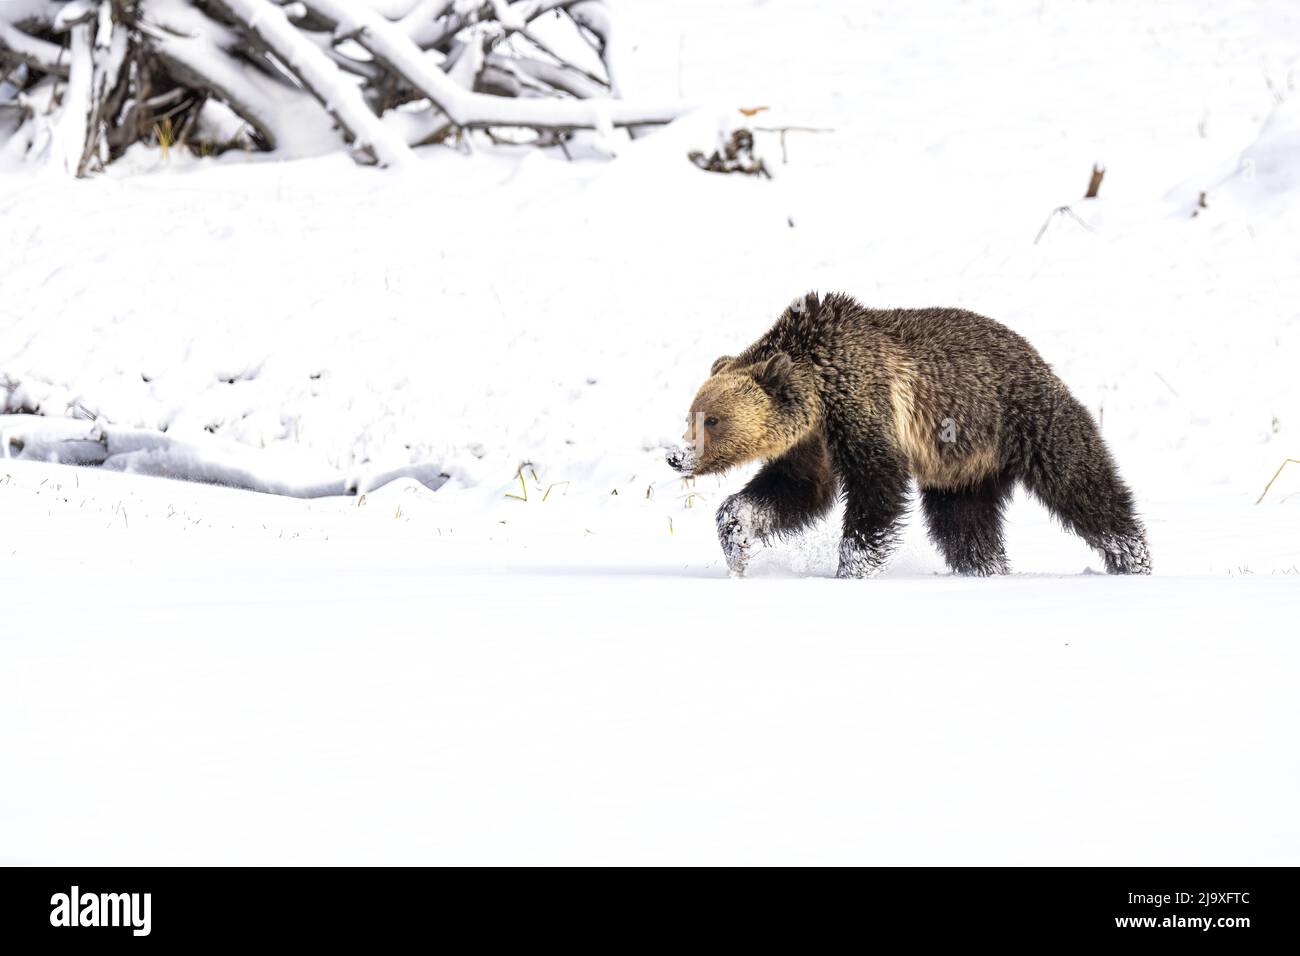 Grizzly Bear on snow Stock Photo